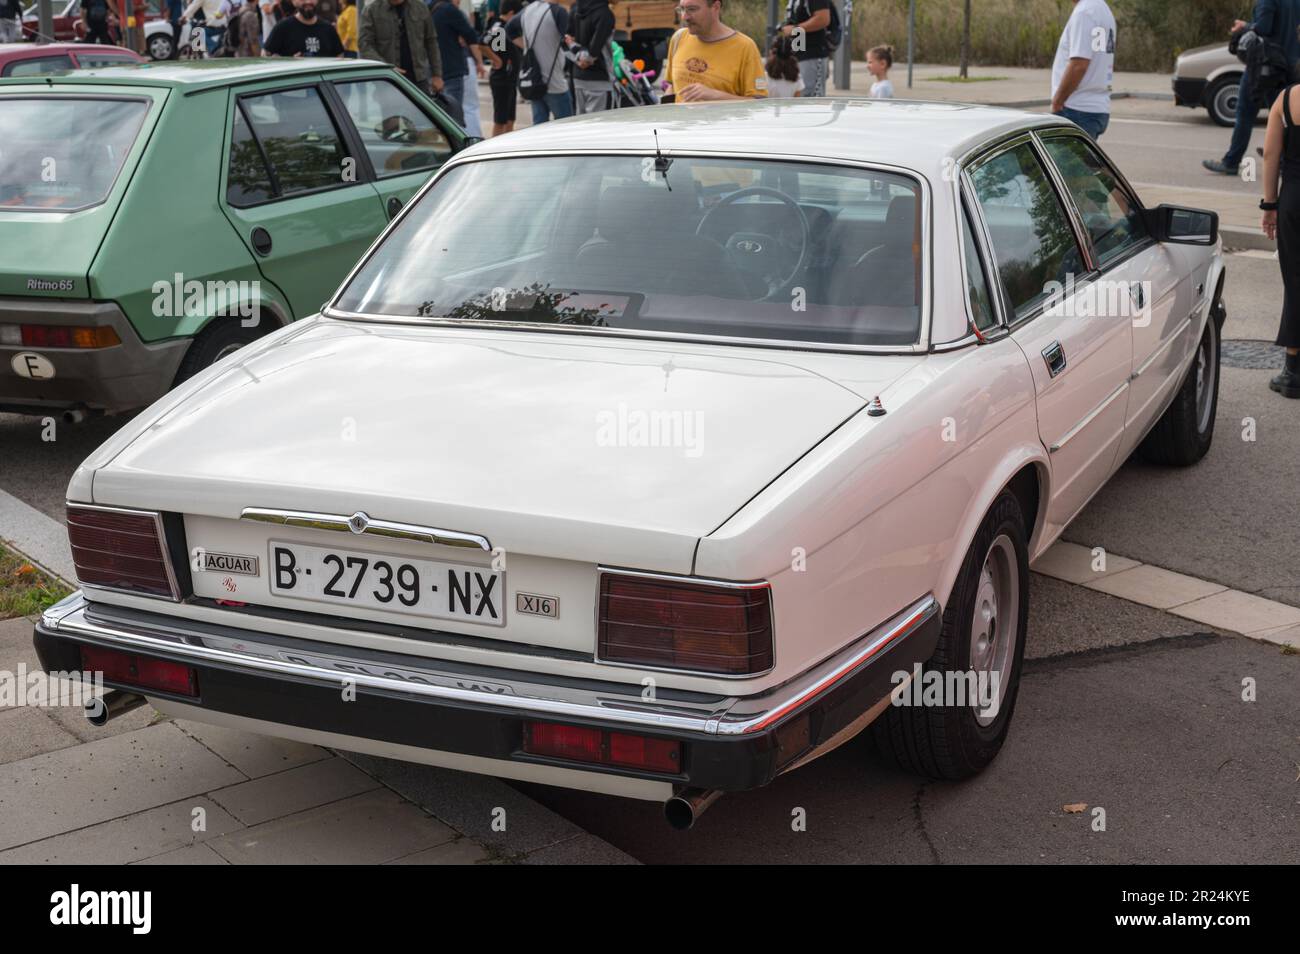 Rear view of a classic white Jaguar XJ6 parked in the street Stock Photo